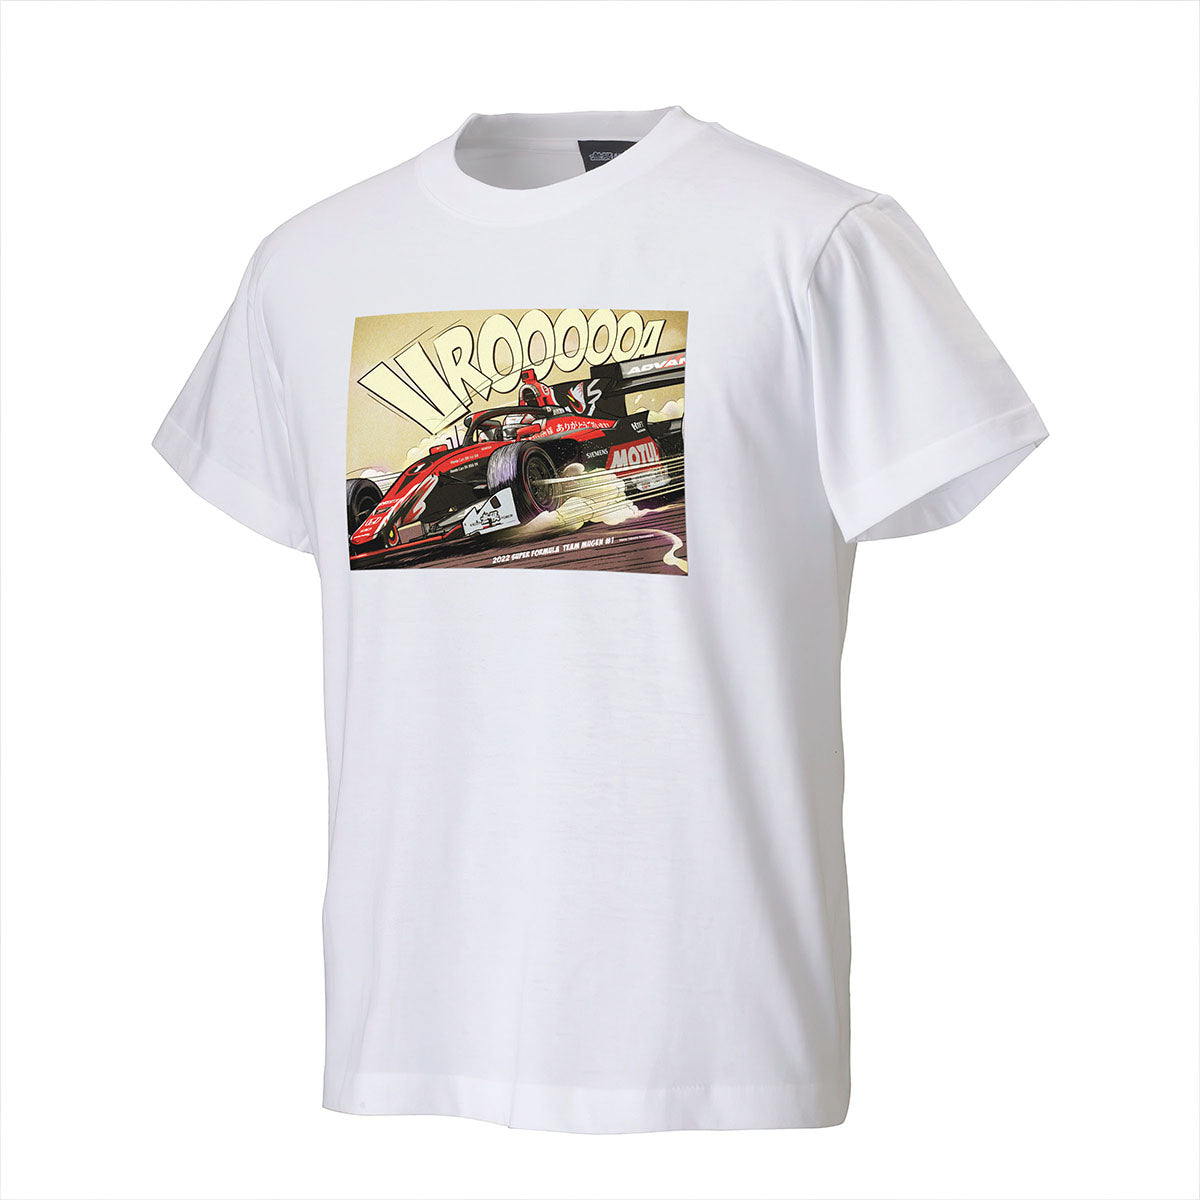 MUGEN MUGEN SF22 T-SHIRT WHITE LARGE FOR  90000-XYM-604A-W4